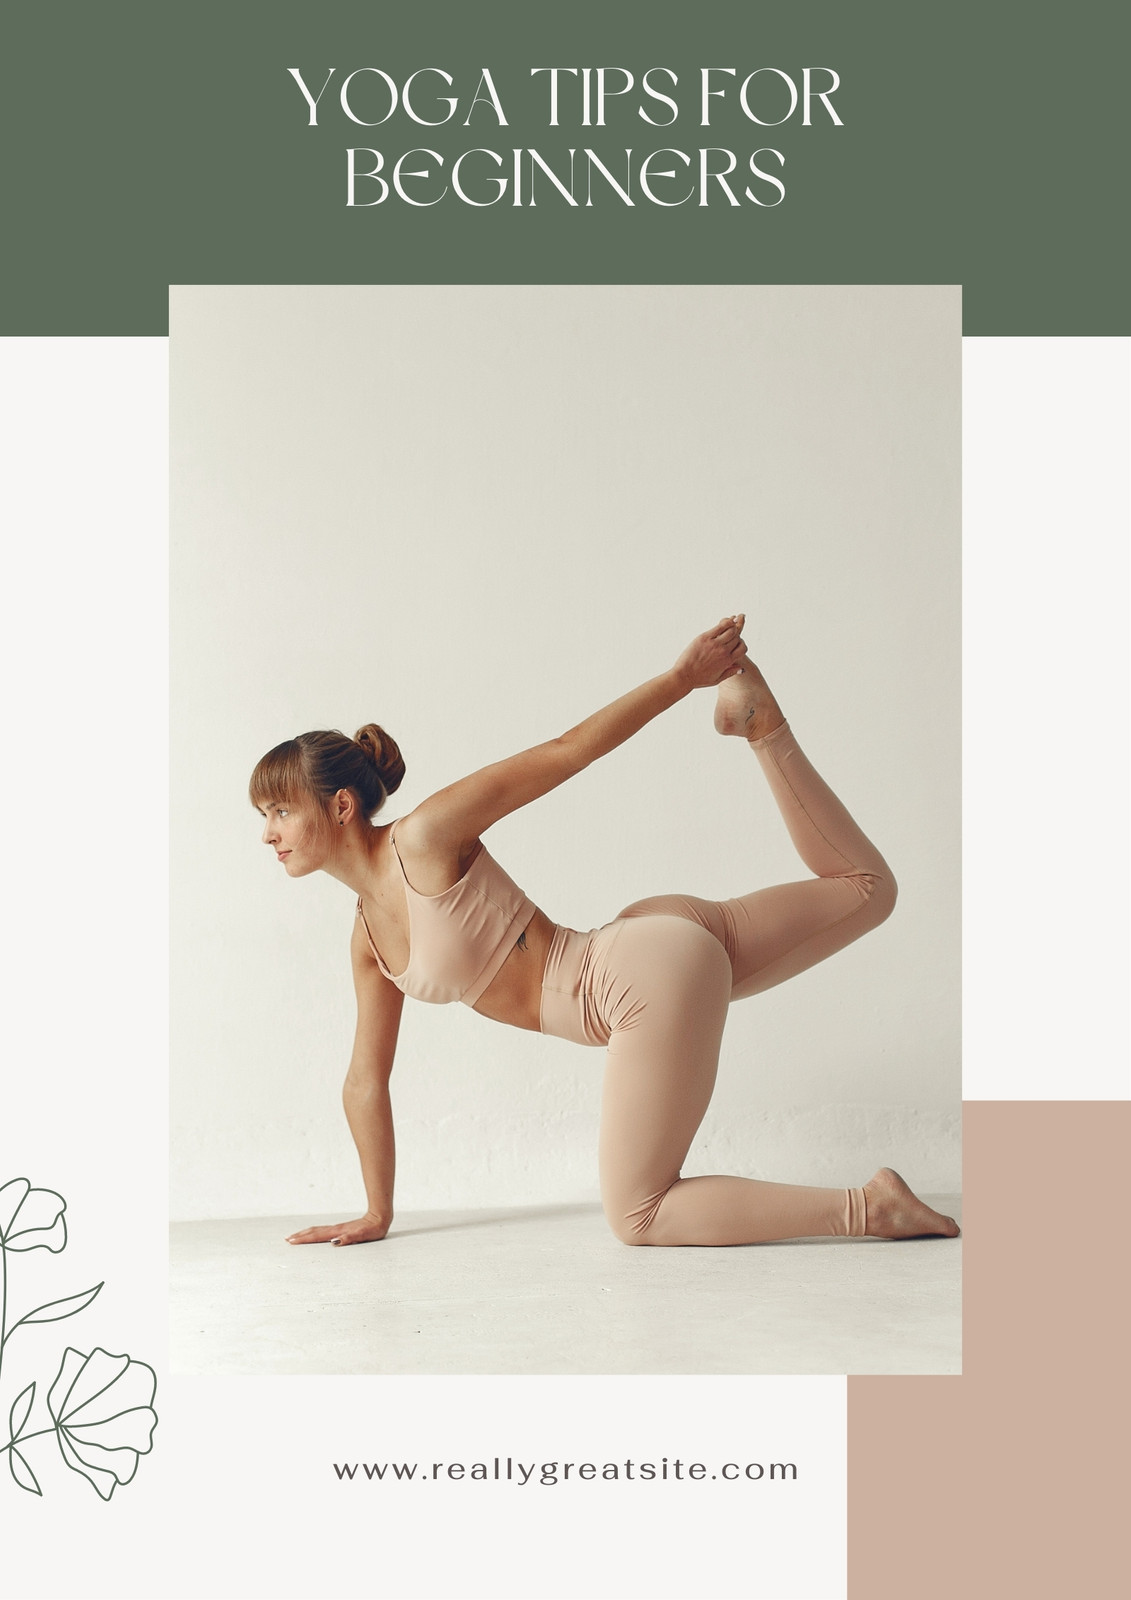 Yoga Poses Posters